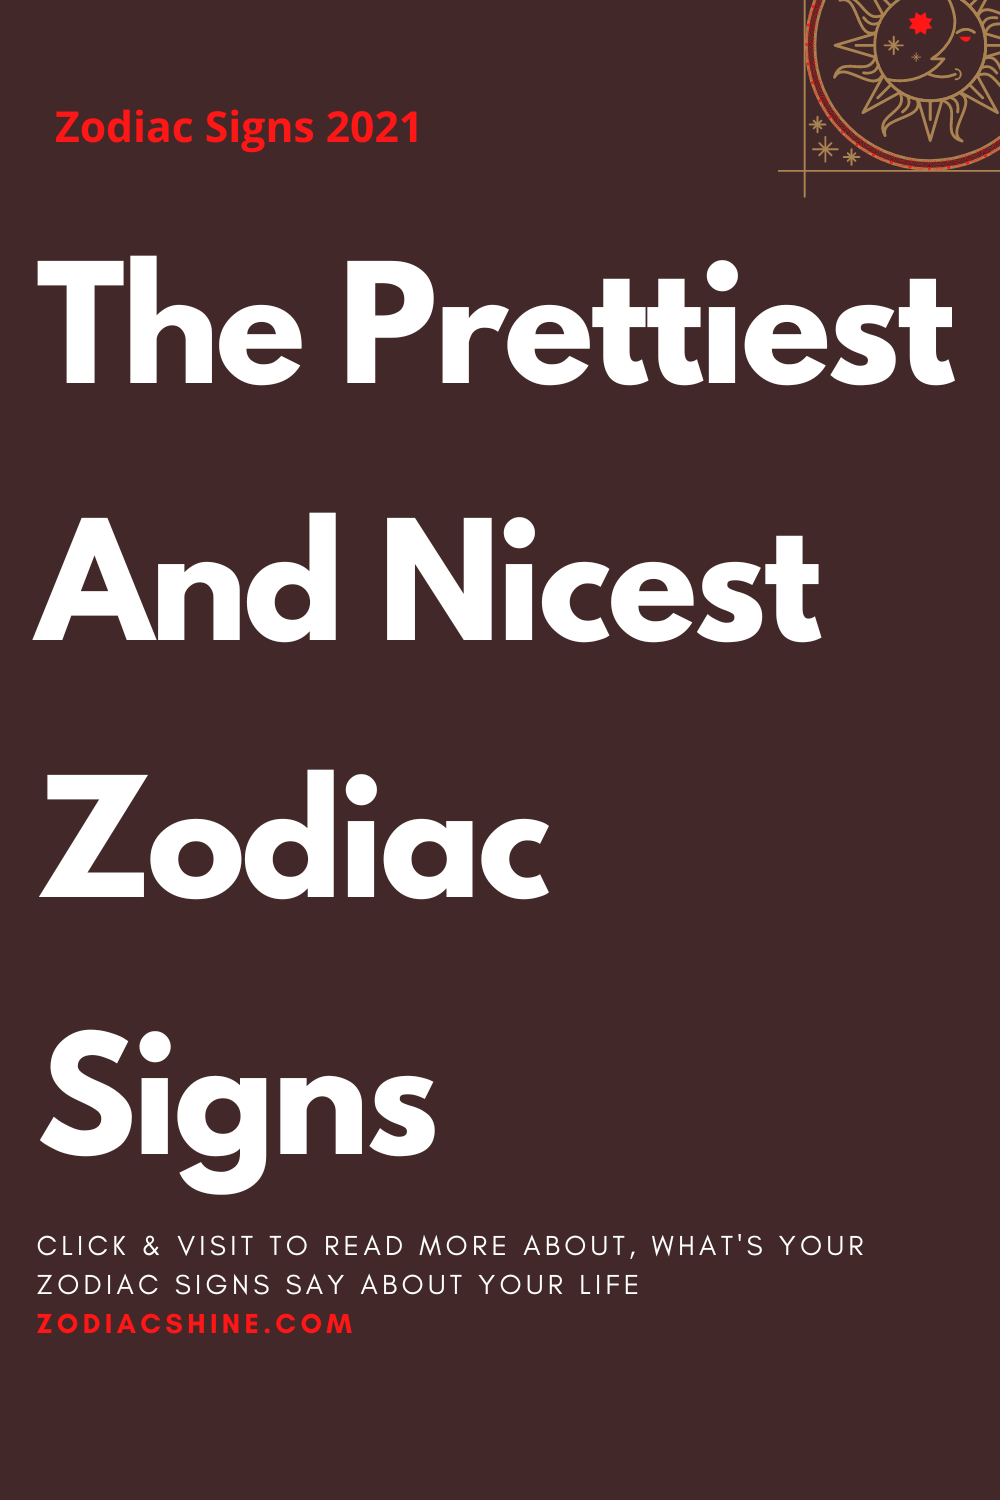 The Prettiest And Nicest Zodiac Signs